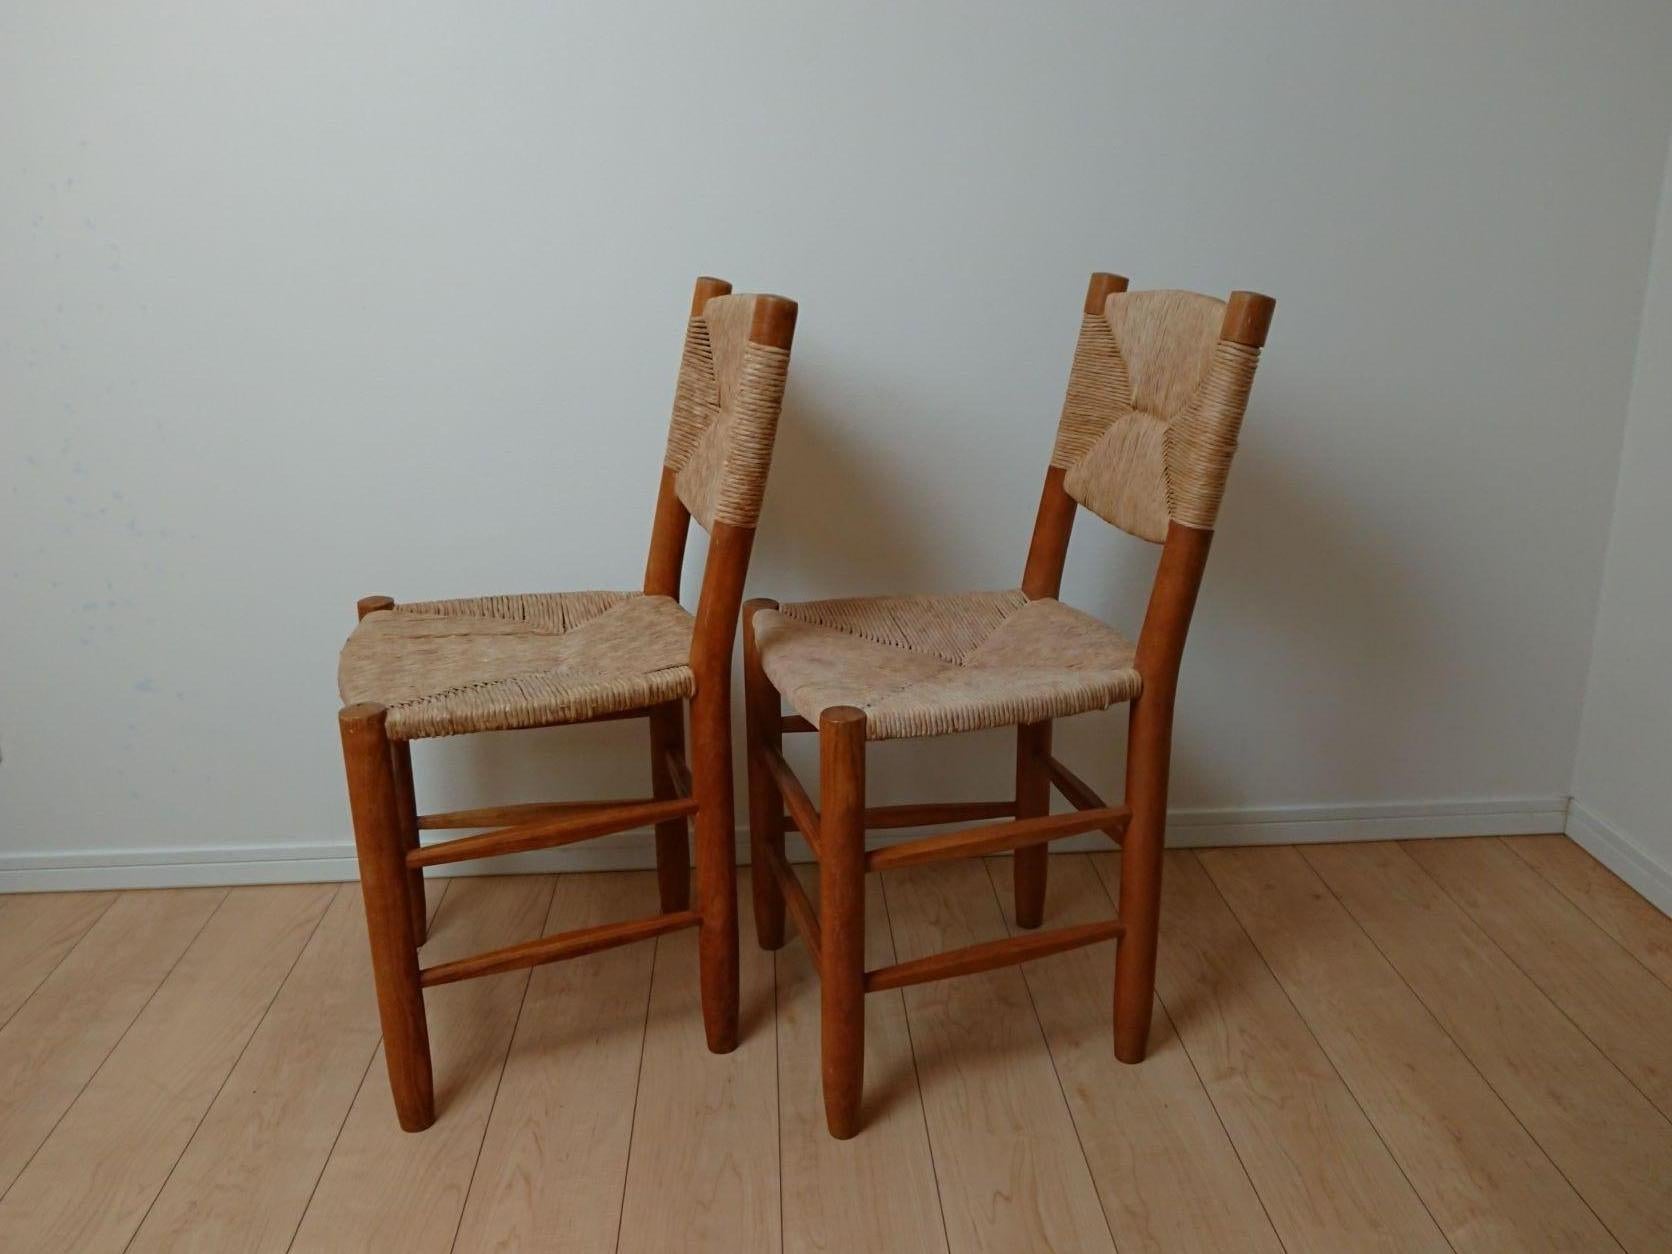 Solid wood side chairs n?19 ‘’ Bauche’’ from BCB.
Inclined back, rush seat and backrest designed Charlotte Perriand.
These are in good original condition.